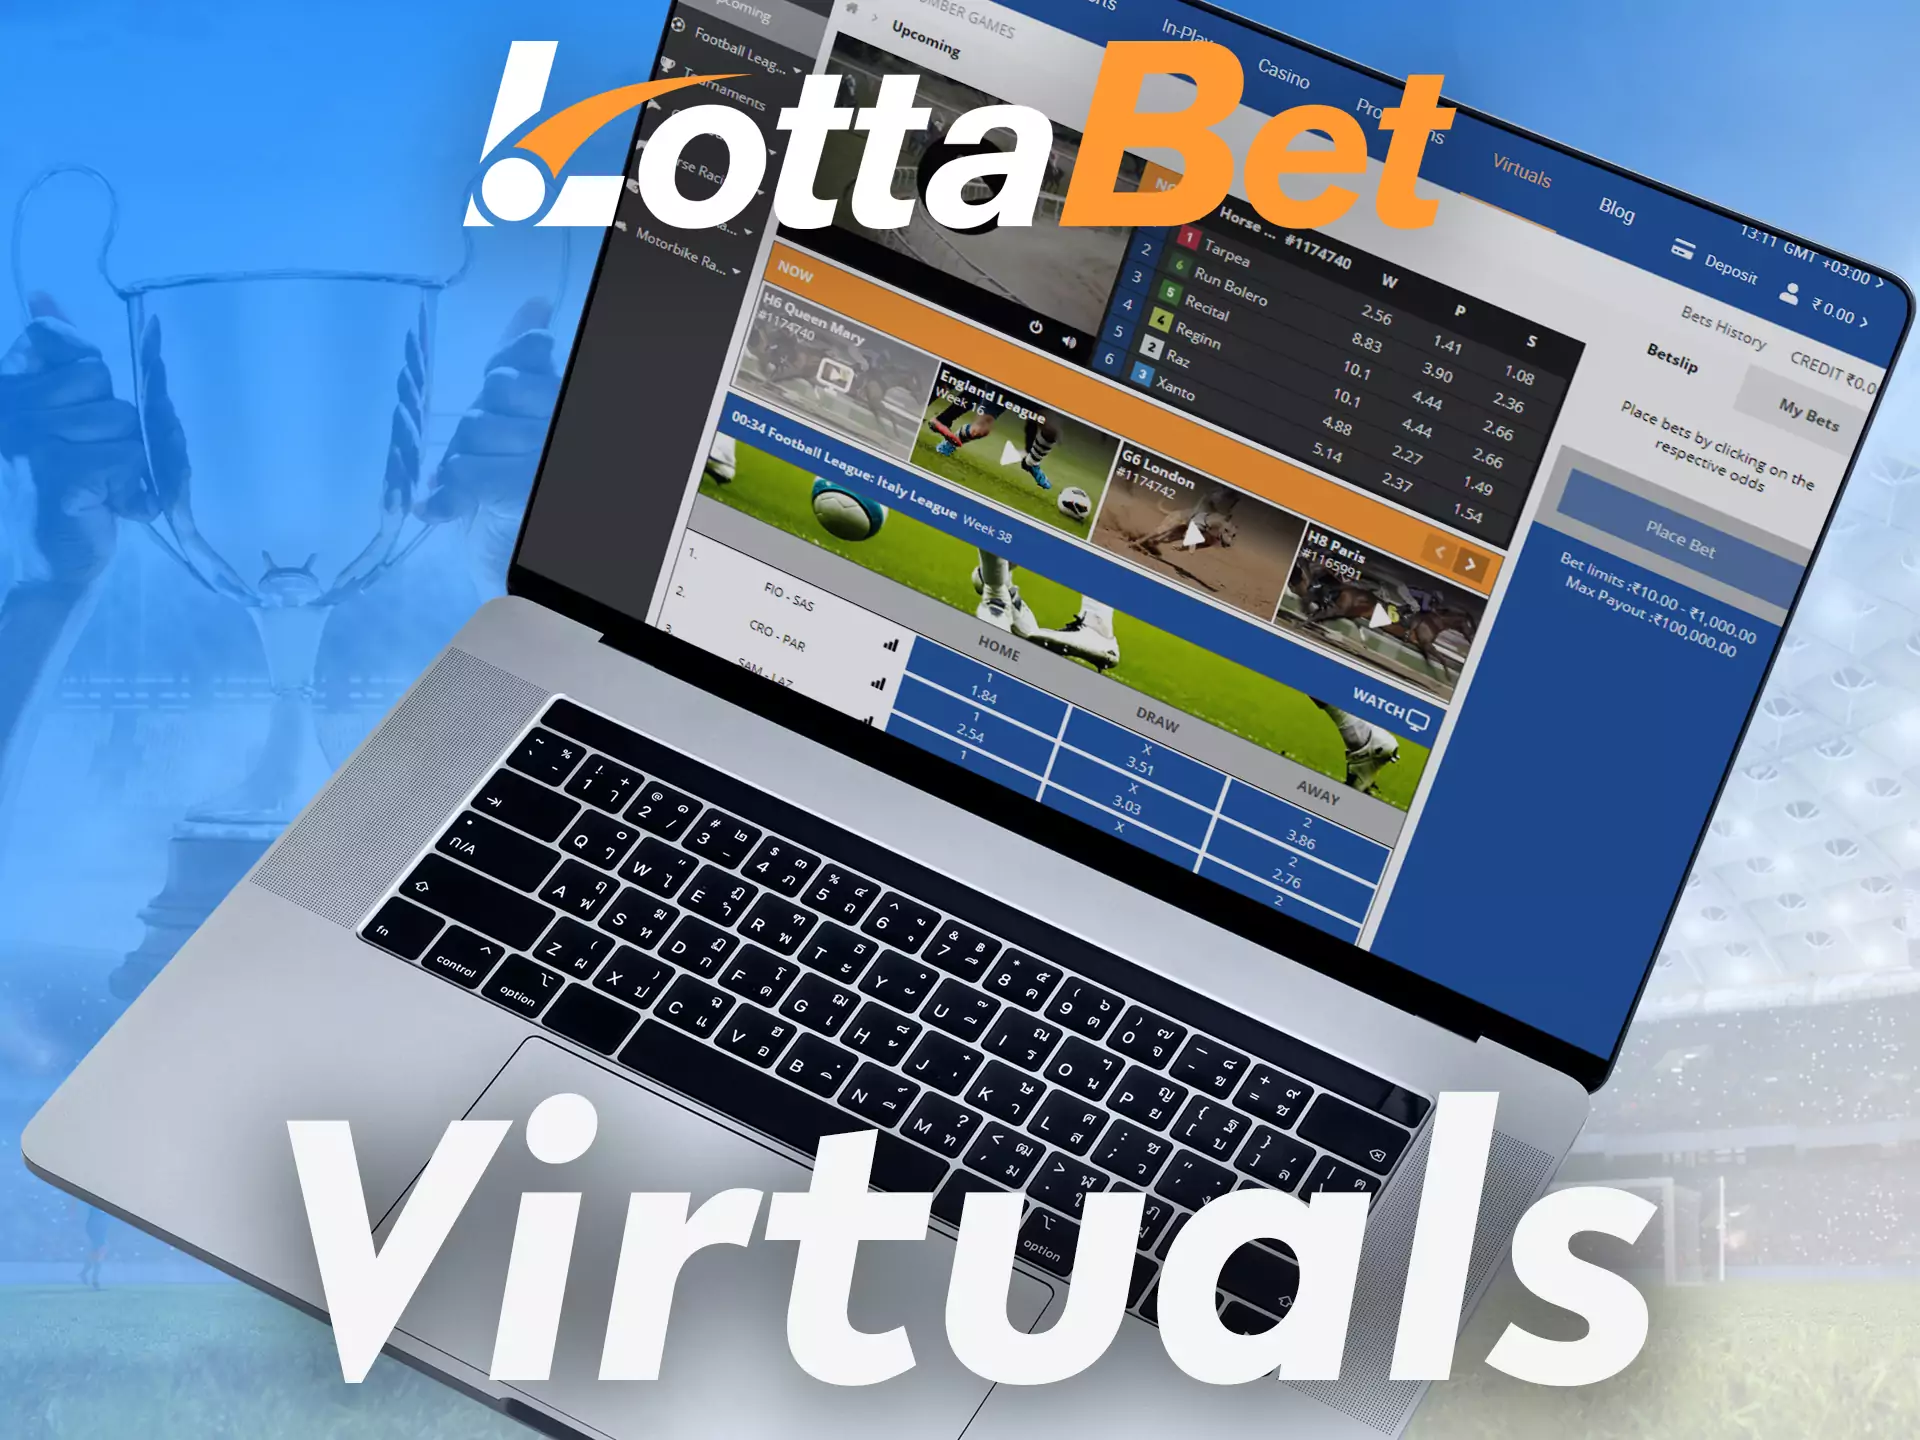 Besides traditional sports and esports events, you can bet on Virtual Sports matches on Lottabet.